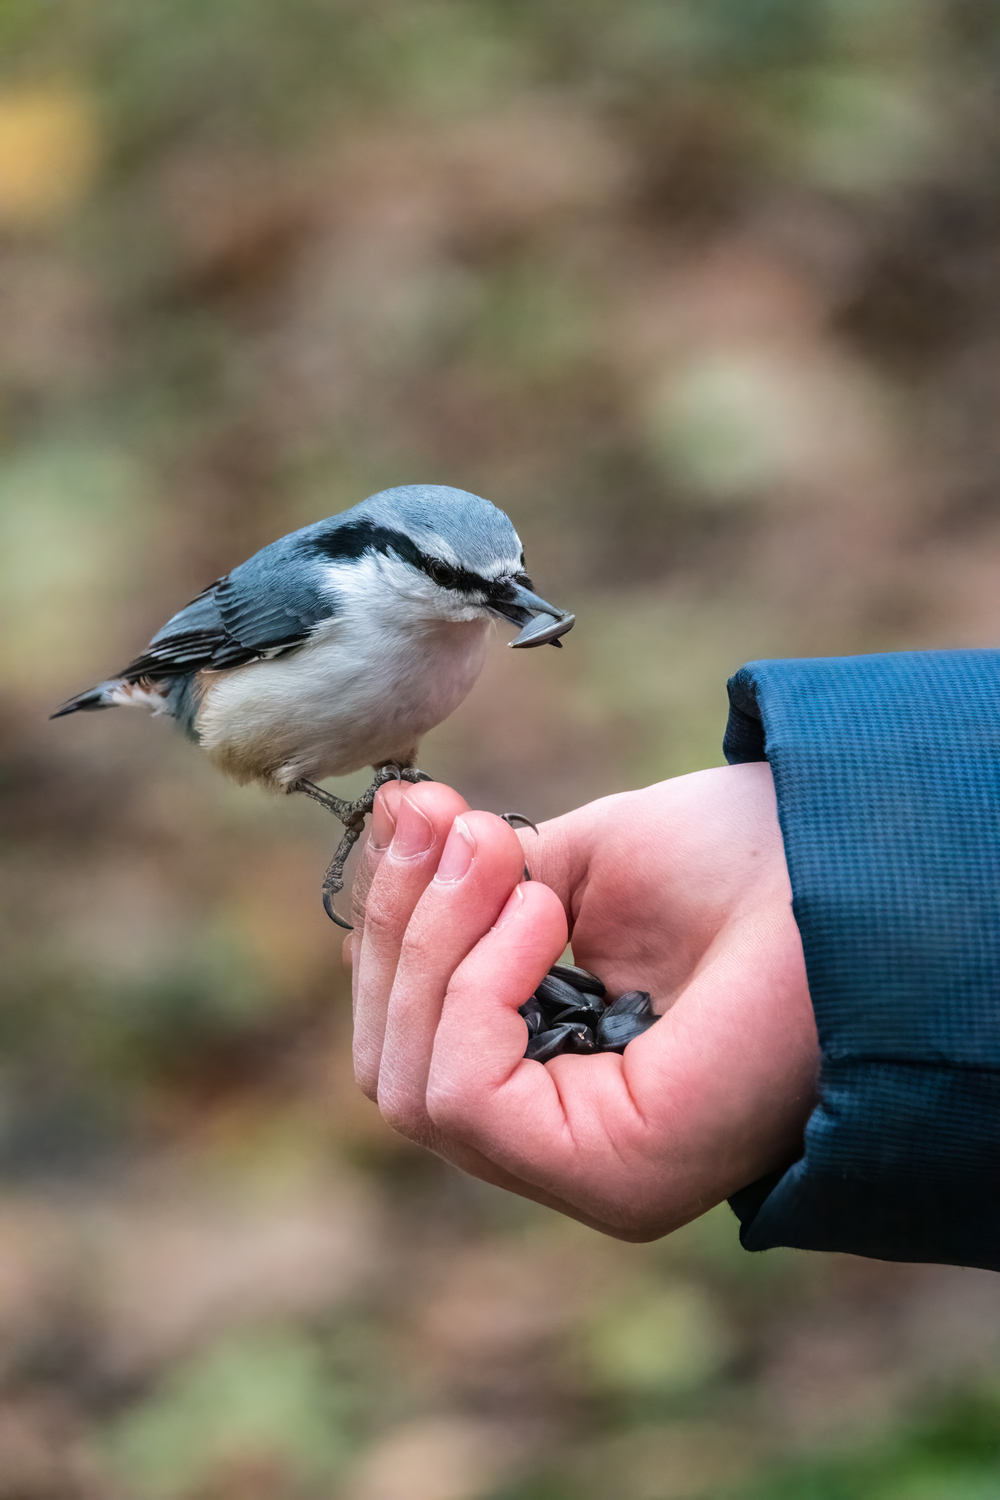 The Foods that Nuthatches Eat